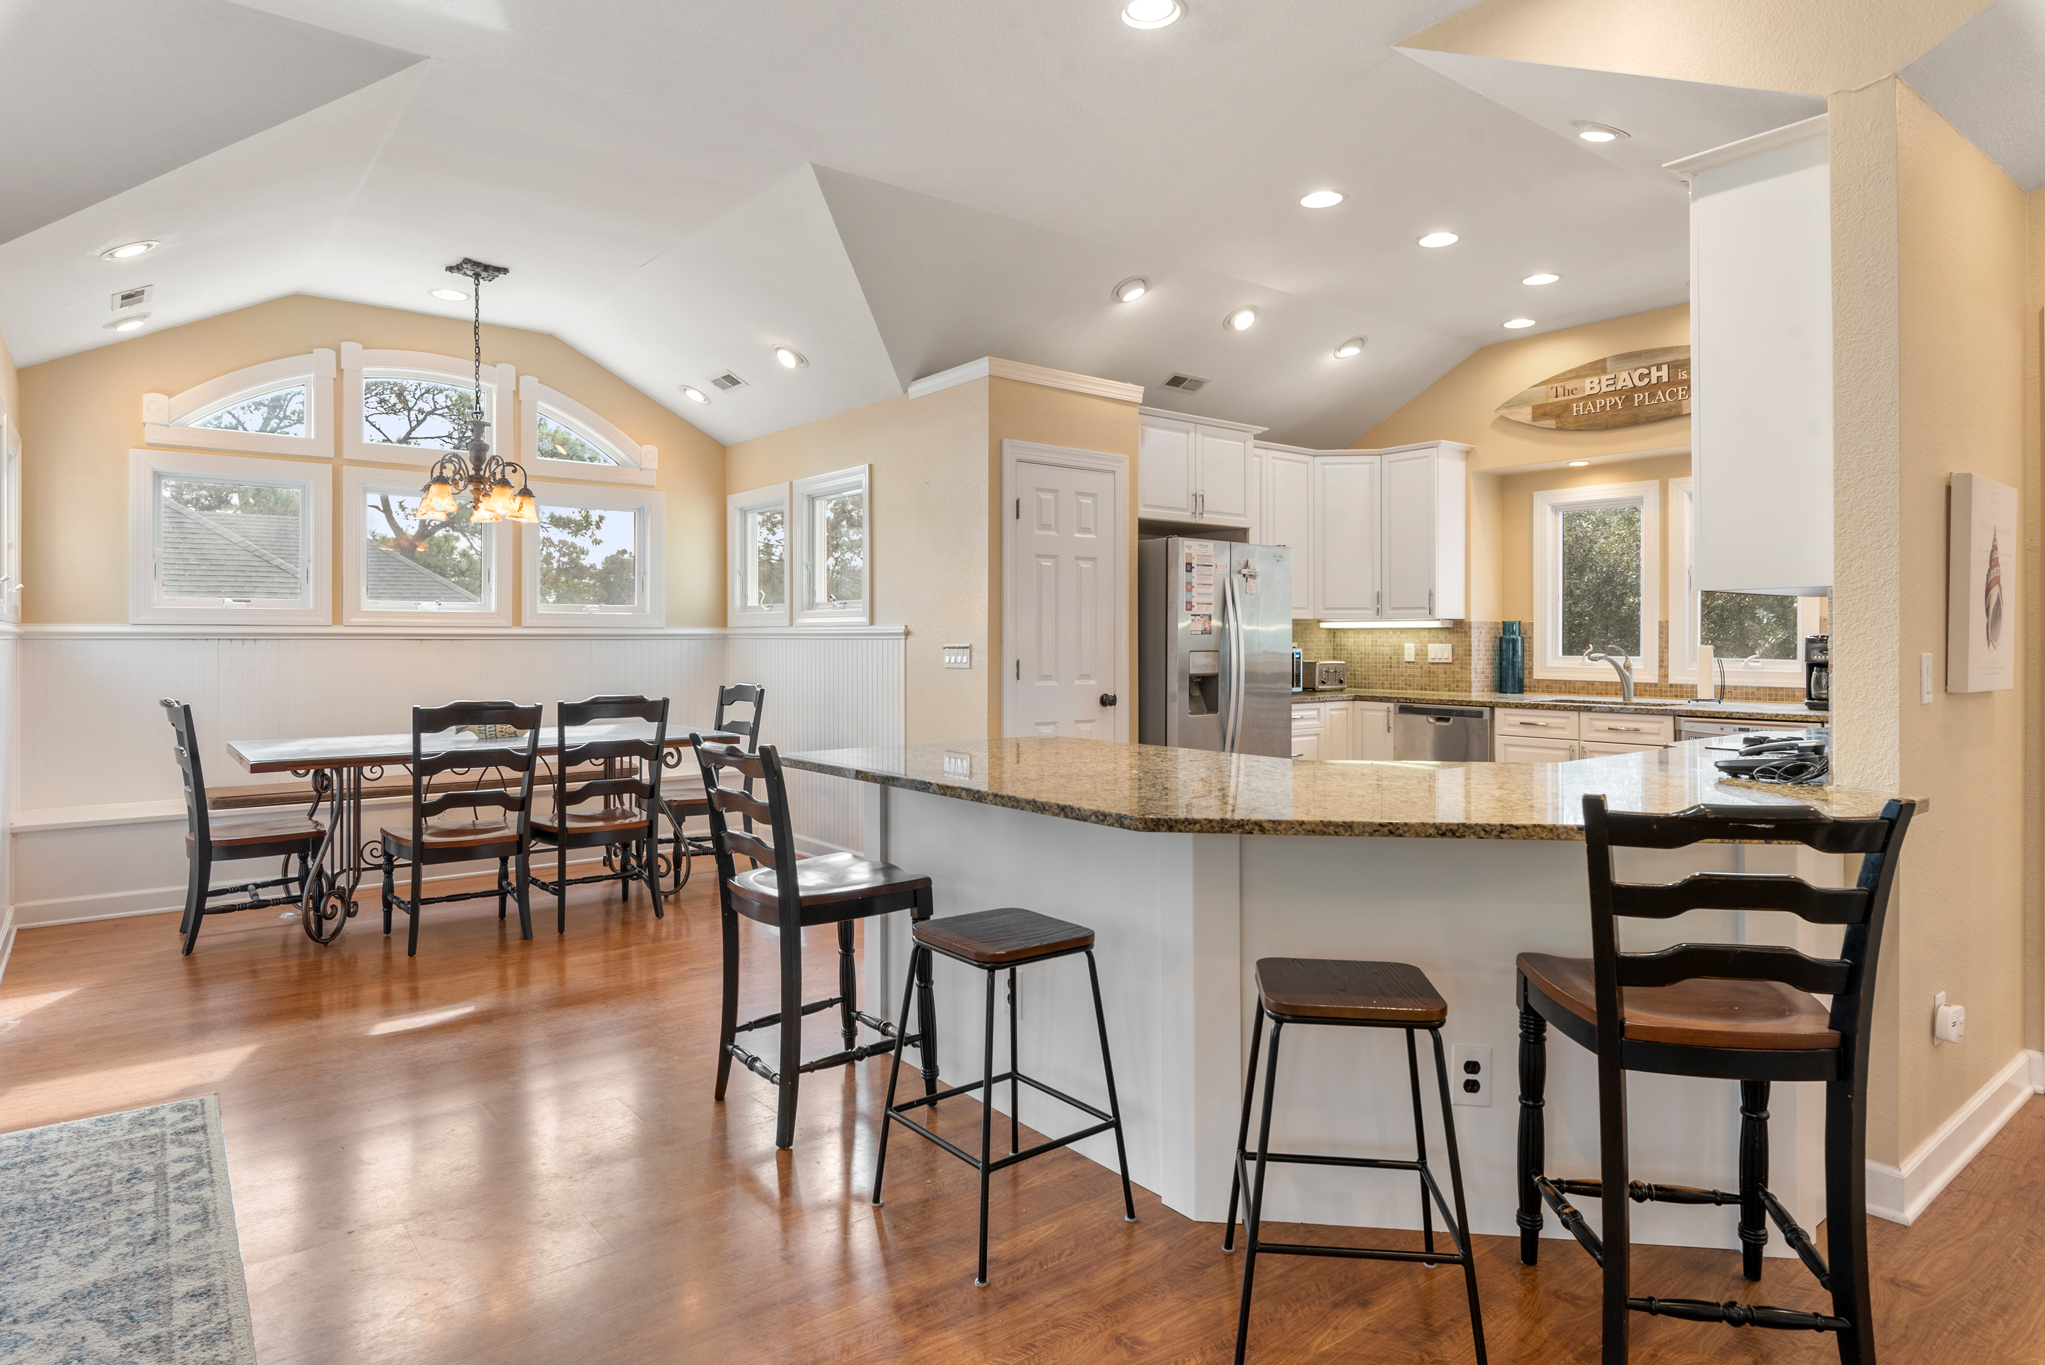 CL579: Turtles Nest | Top Level Kitchen and Breakfast Nook